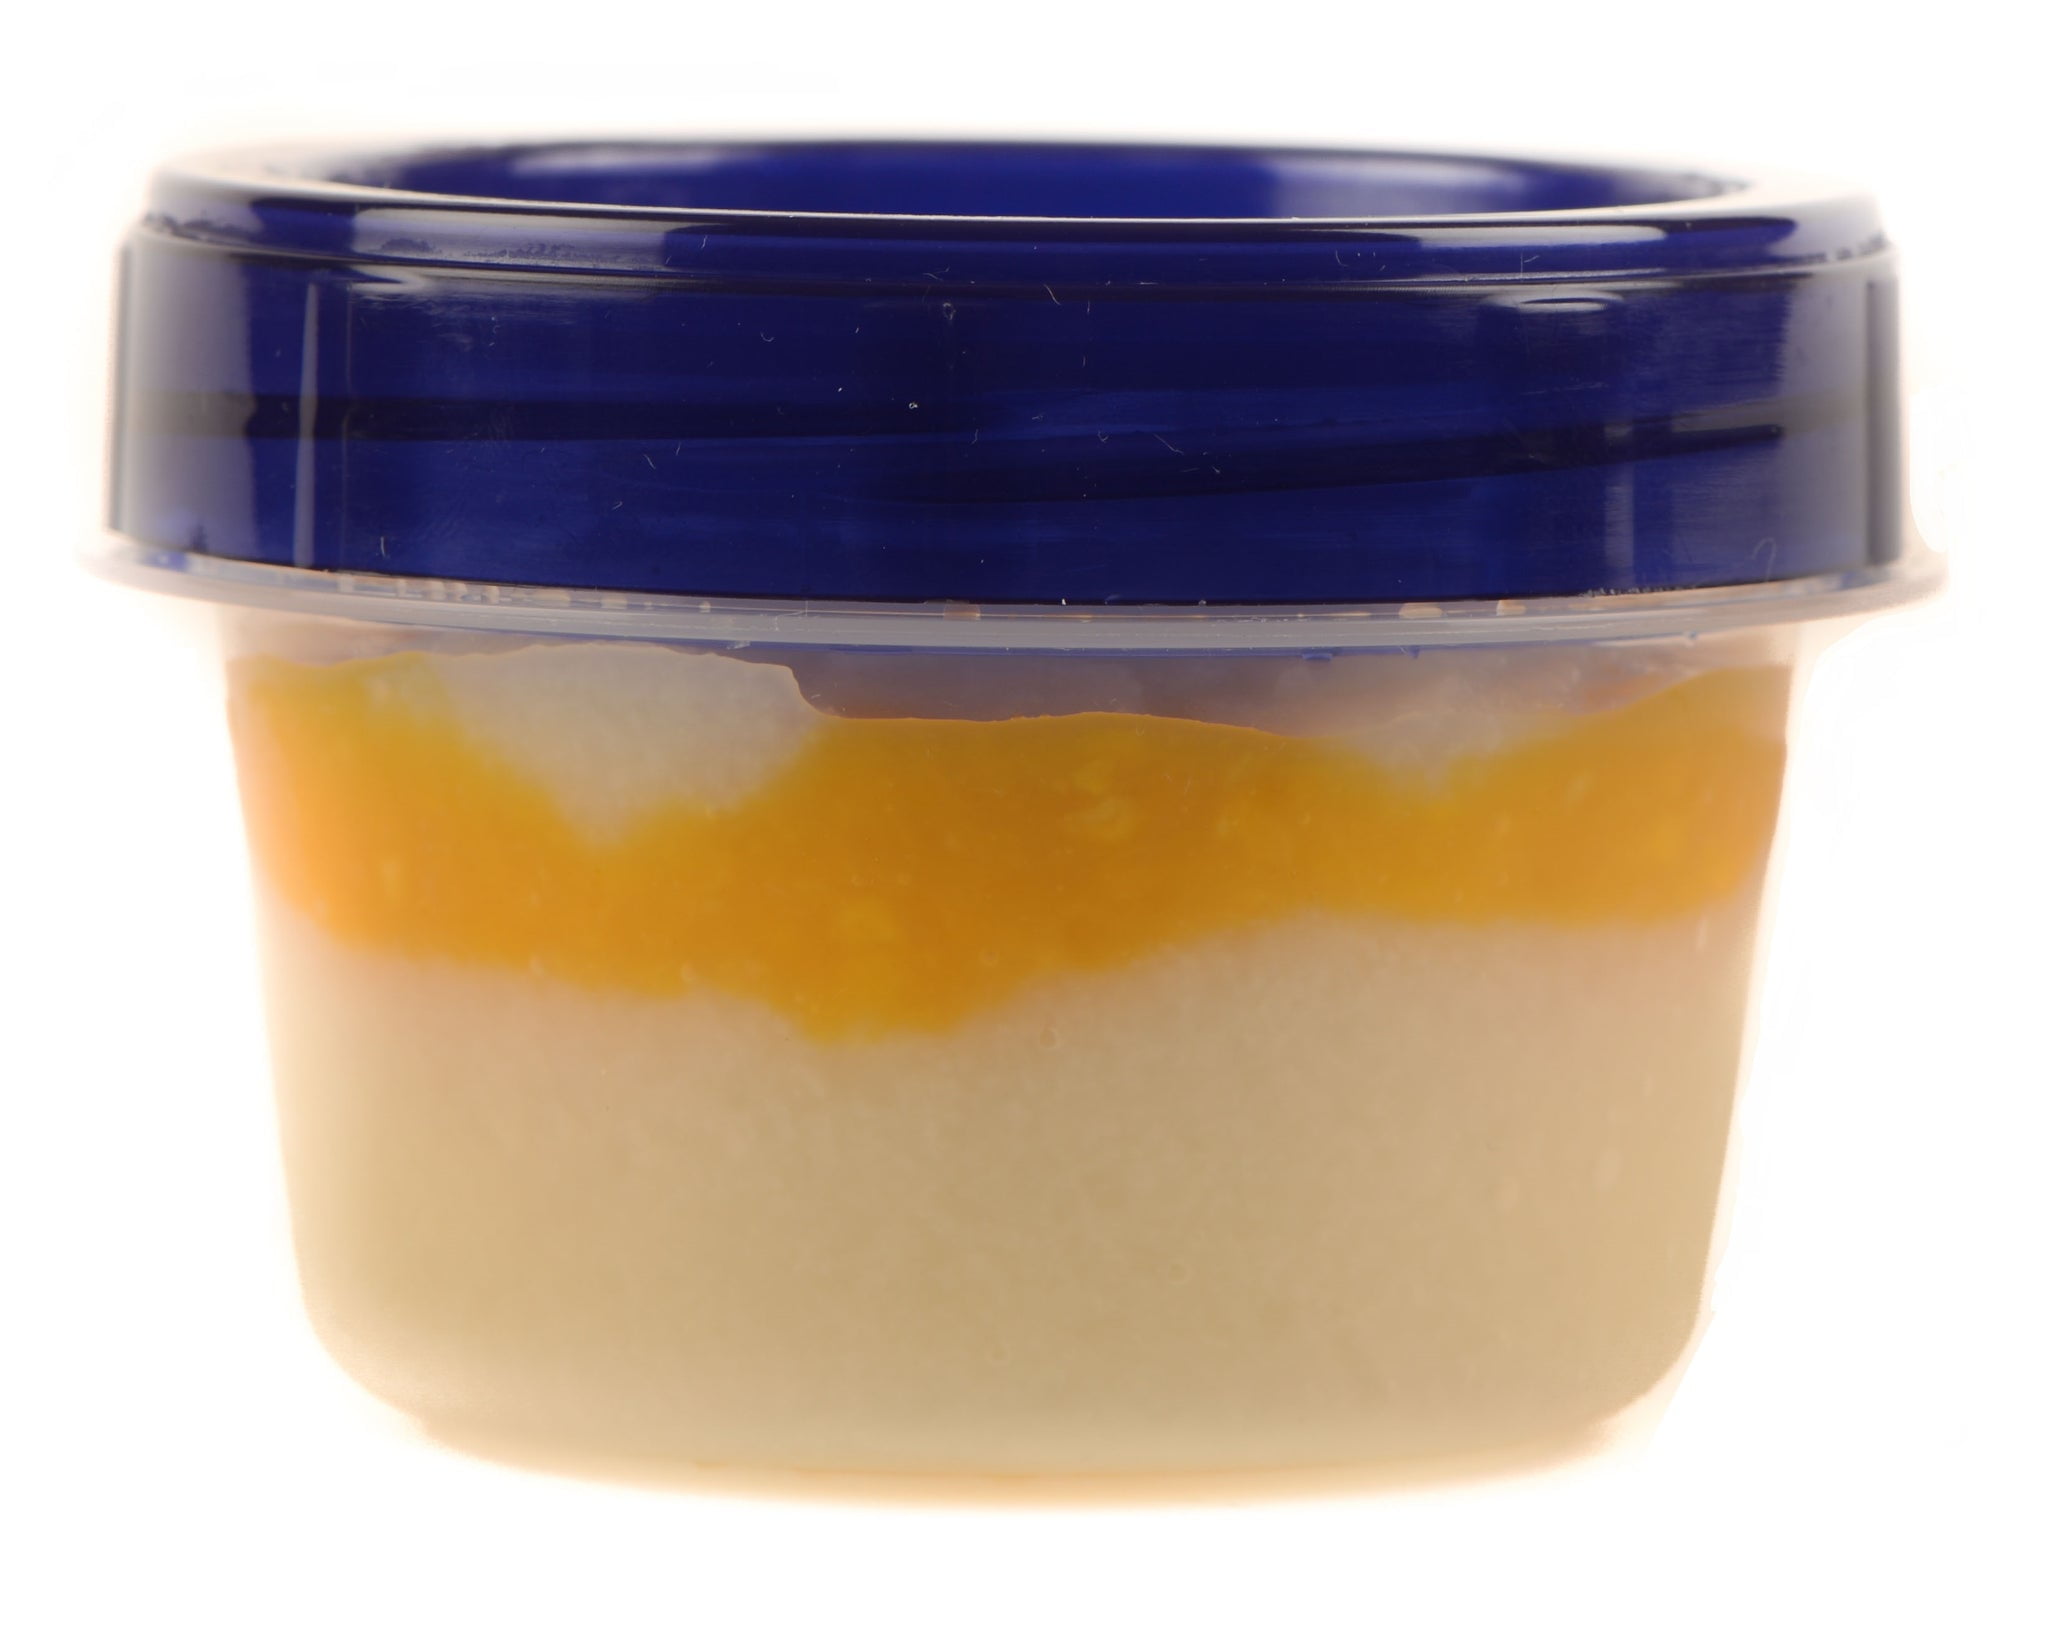 White Tough Top Airtight Lids - Leak-Proof and Reusable Solution 